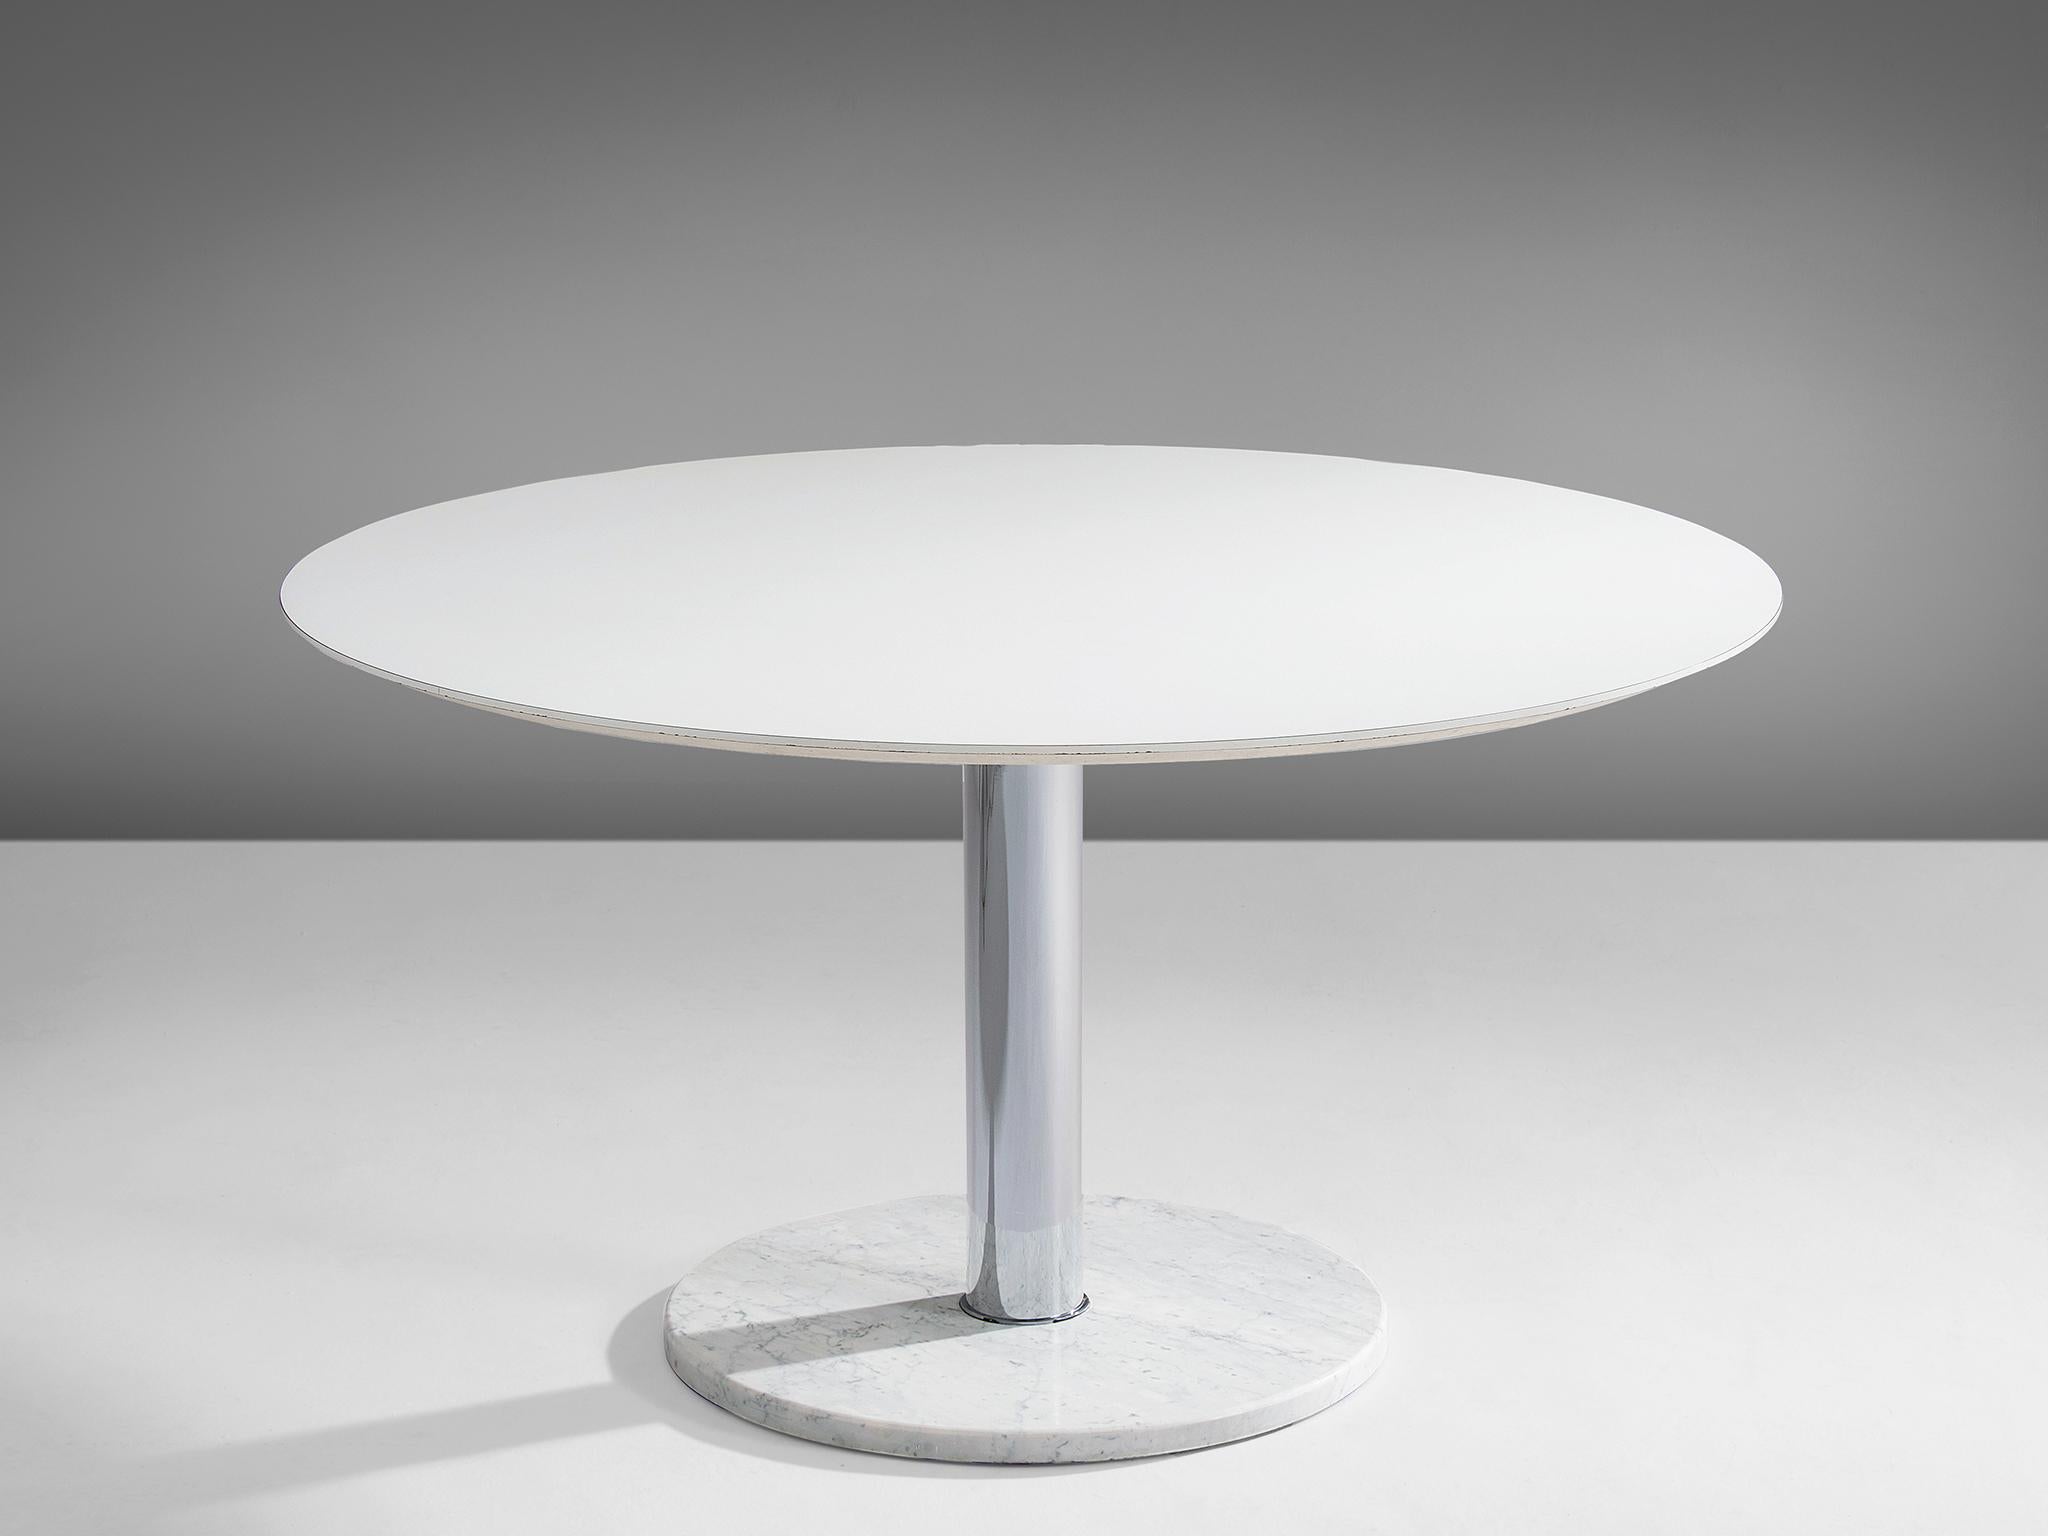 Alfred Hendrickx for Belform, pedestal dining table, wood, chromed steel, and marble, Belgium, circa 1960. 

This round formica top placed on a central chrome tube. The base is made of a with marble round plate. Very modern, slick design that bears